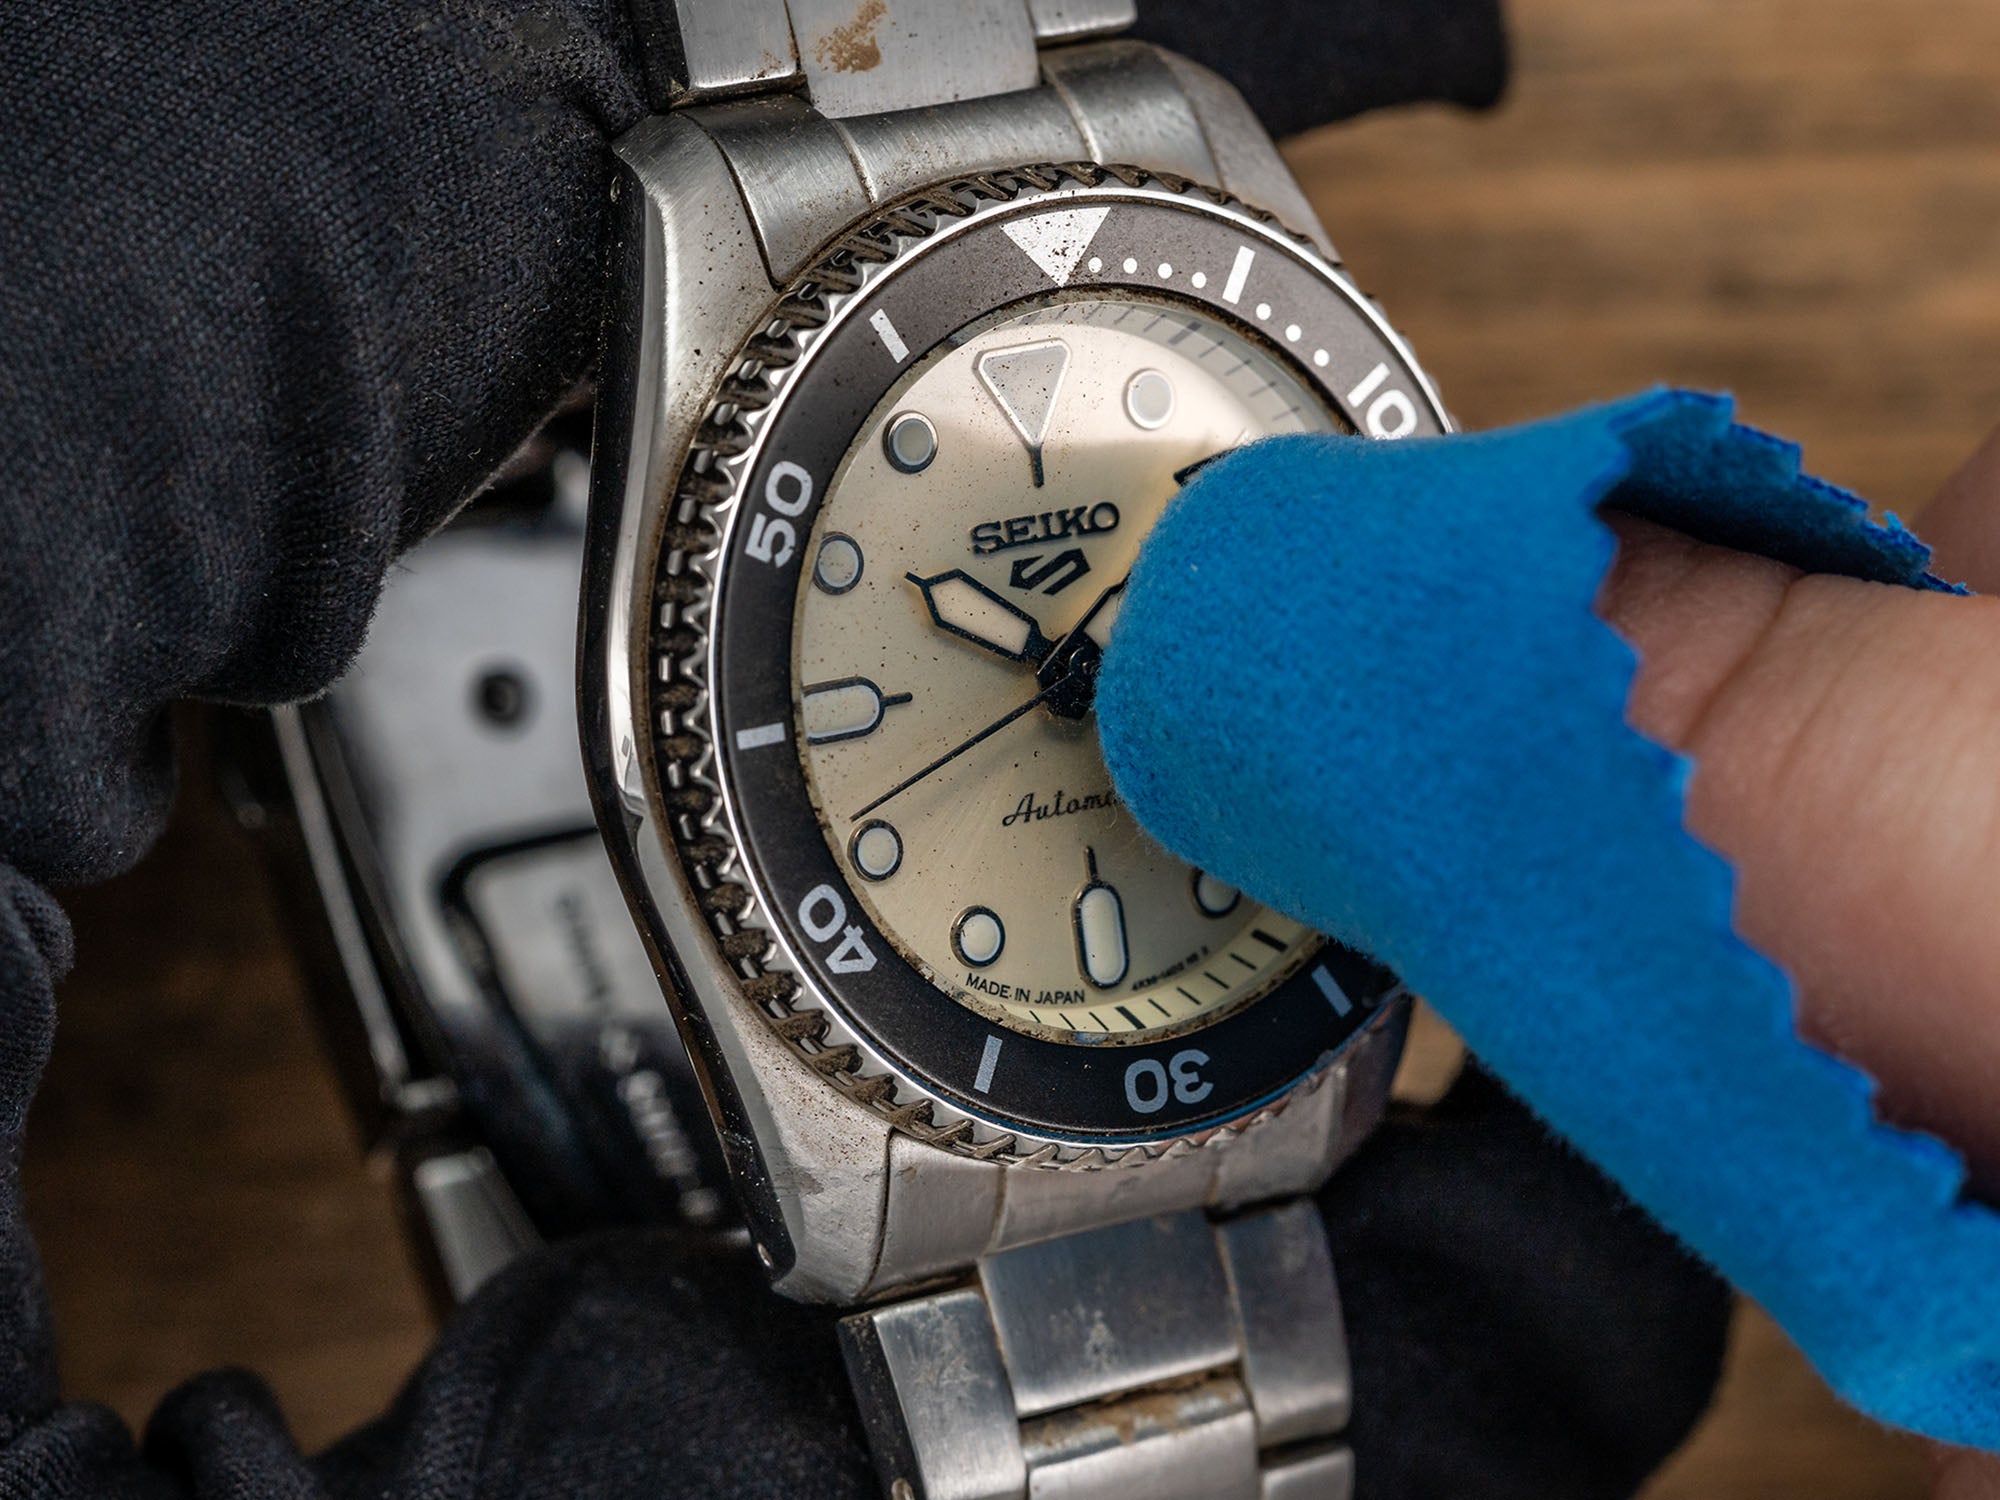 Watch Cleaning 101: How to Keep Your Watch Looking Sharp Between